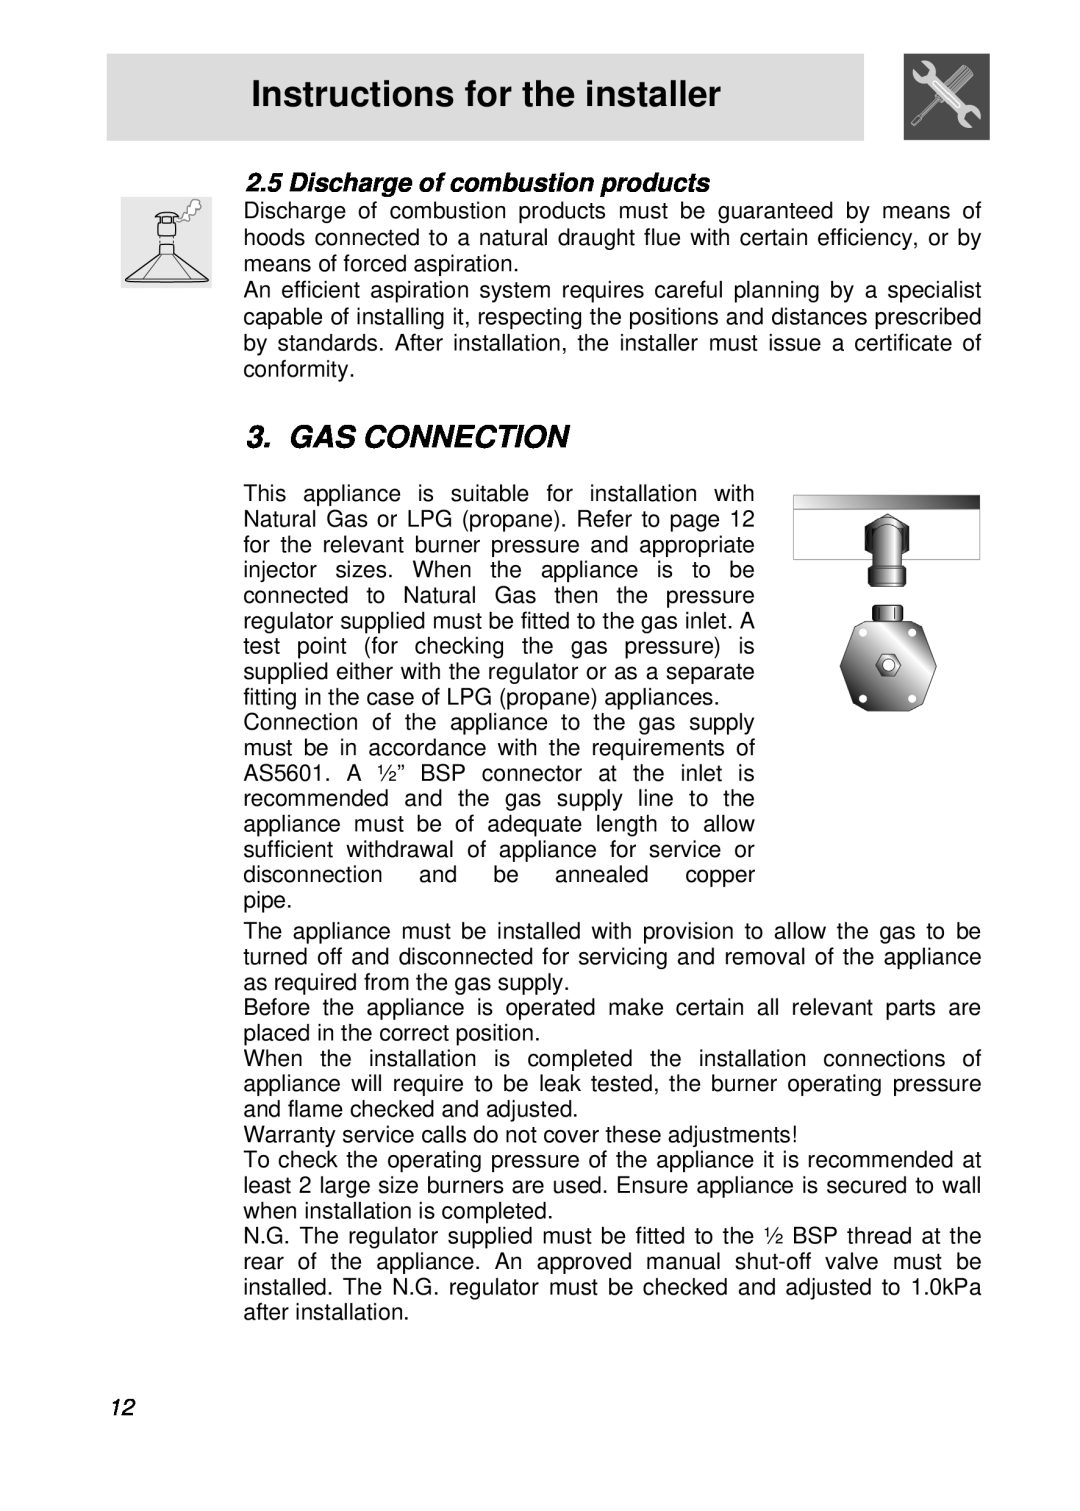 Smeg PGFA95F manual Gas Connection, Discharge of combustion products, Instructions for the installer 